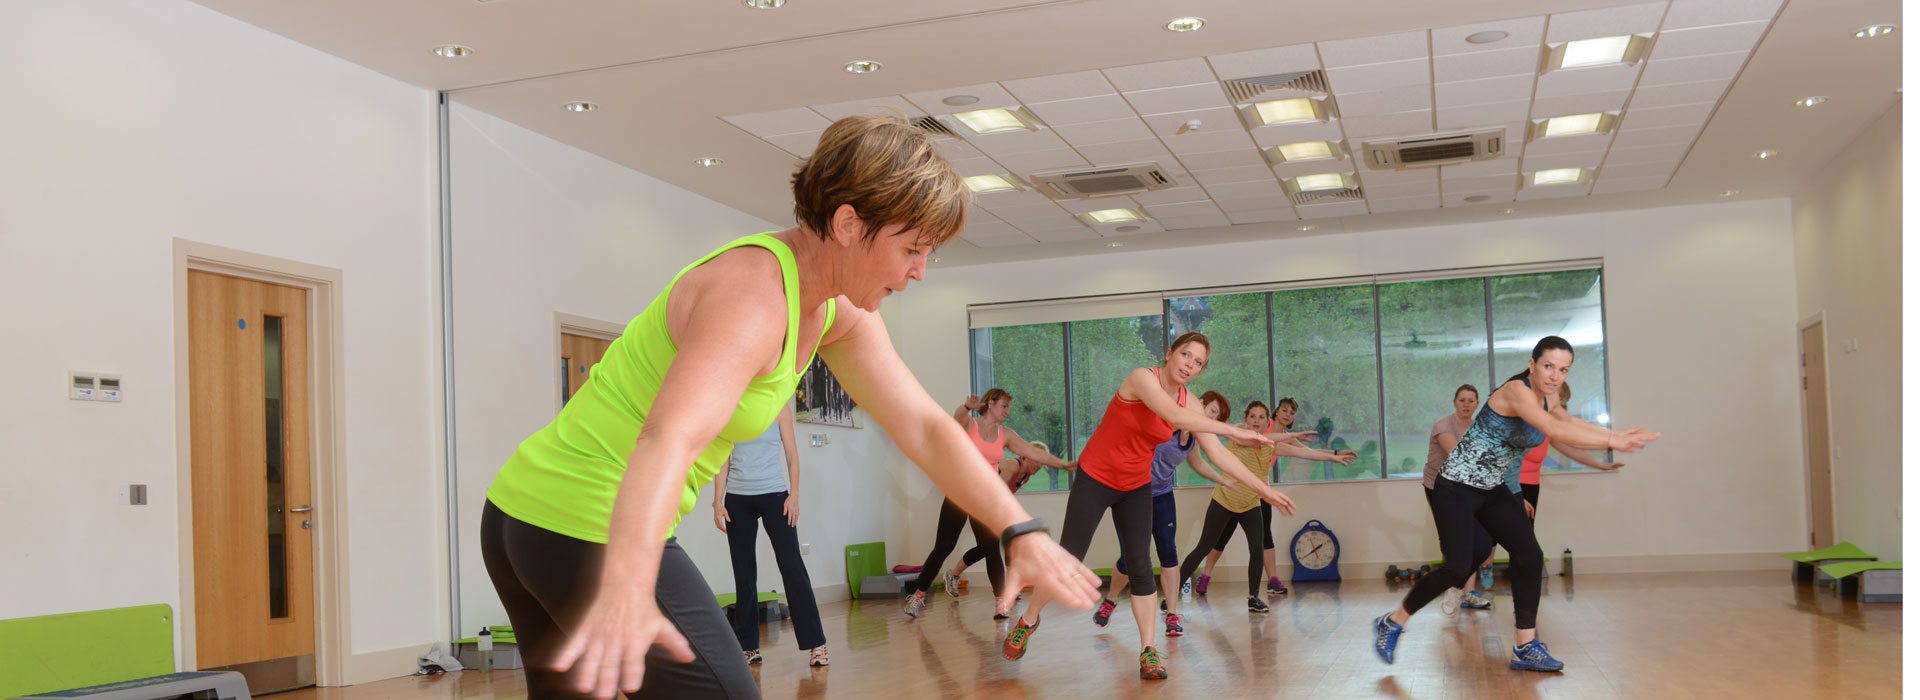 Lean and Mean classes at Malvern Active